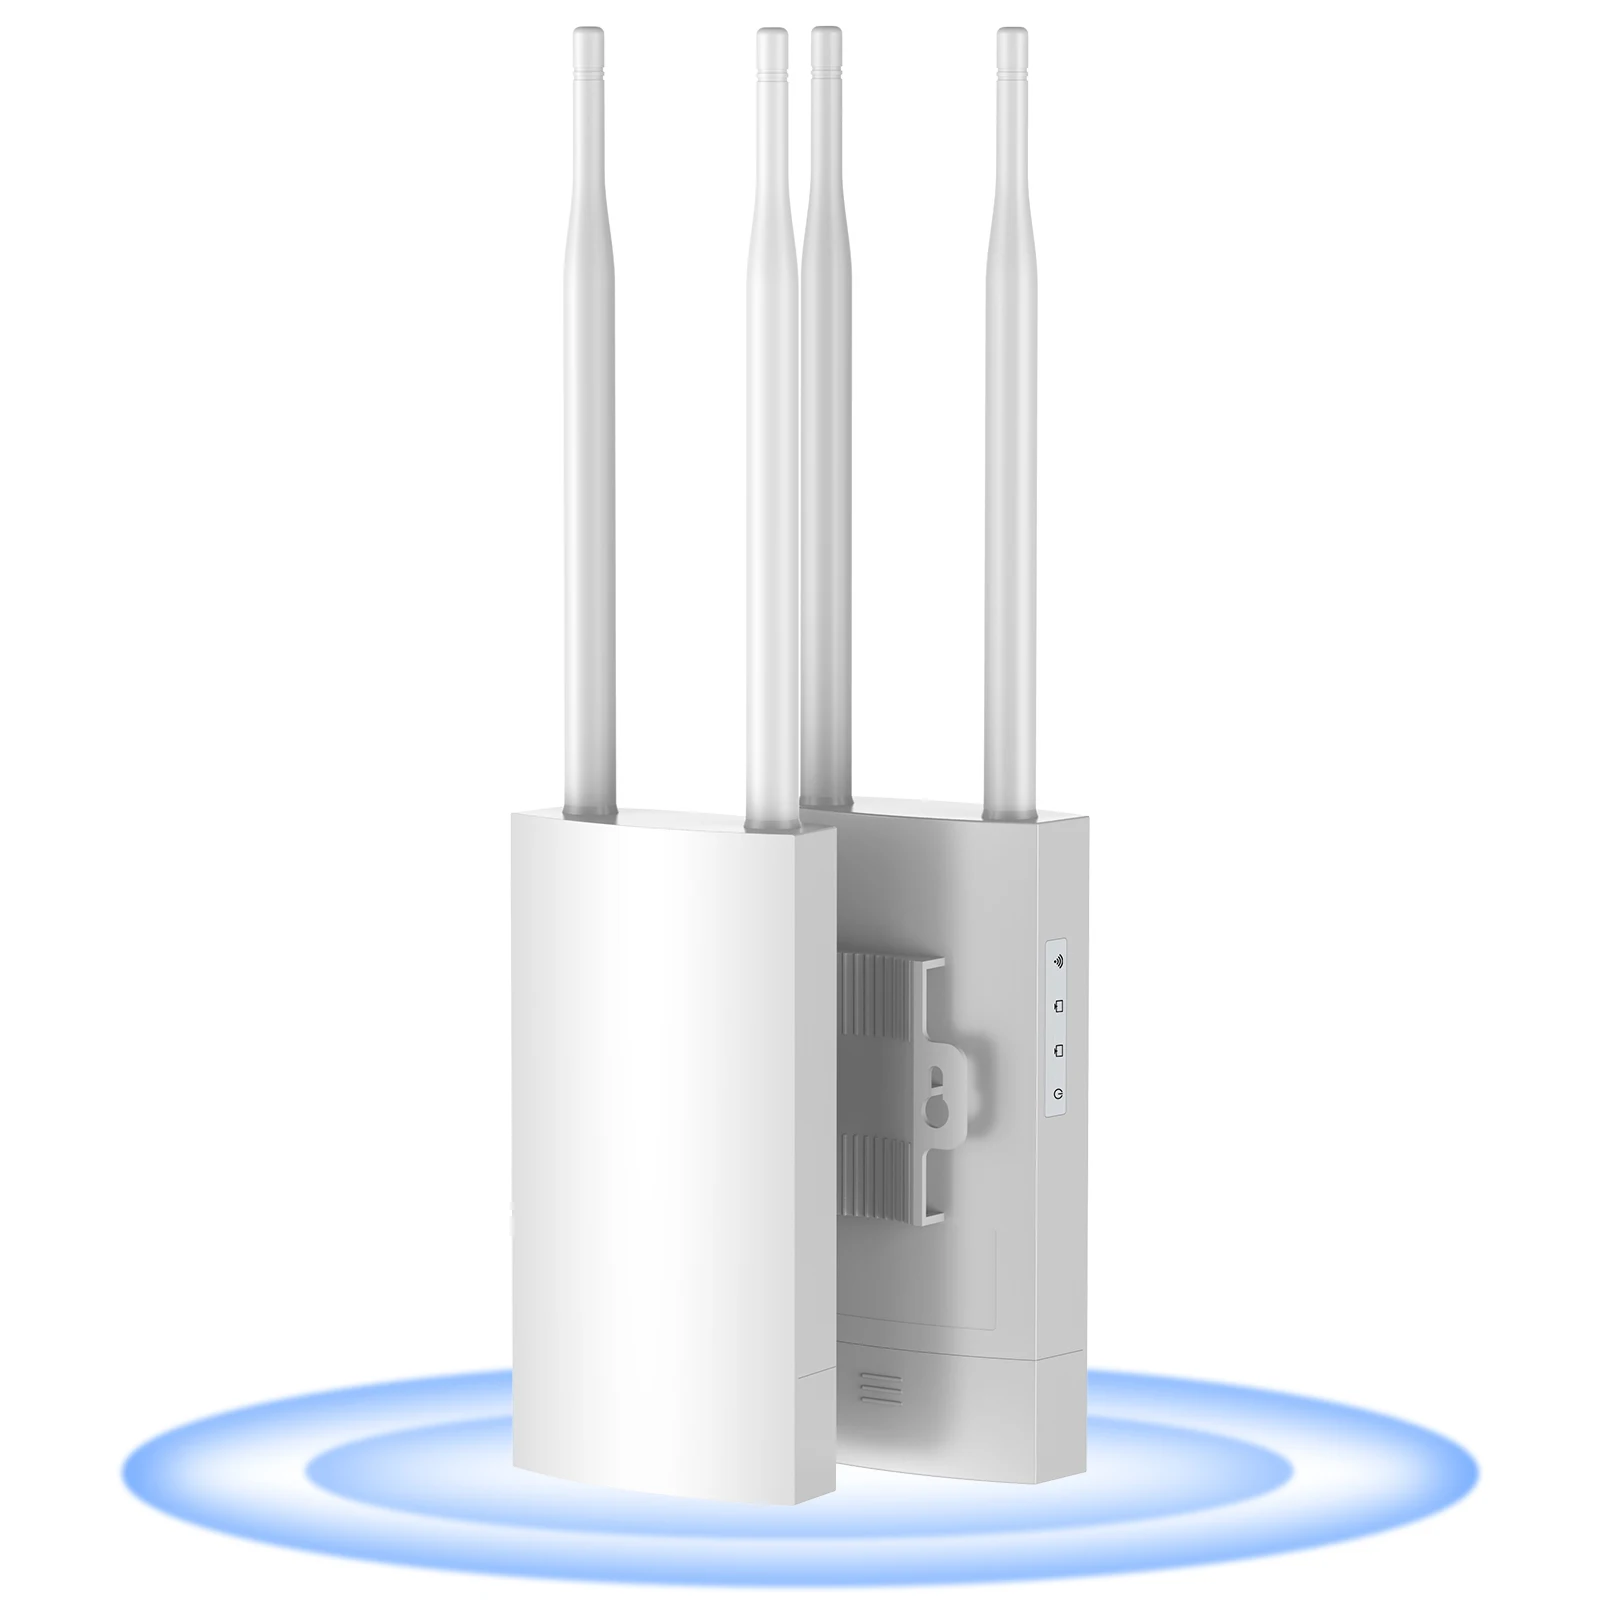 UeeVii UAP180 Outdoor Wireless AP/Router/Repeater/Bridge 2.4G/5.8G 1200Mbps  WiFi Repeater Signal Amplifier support 120 Users